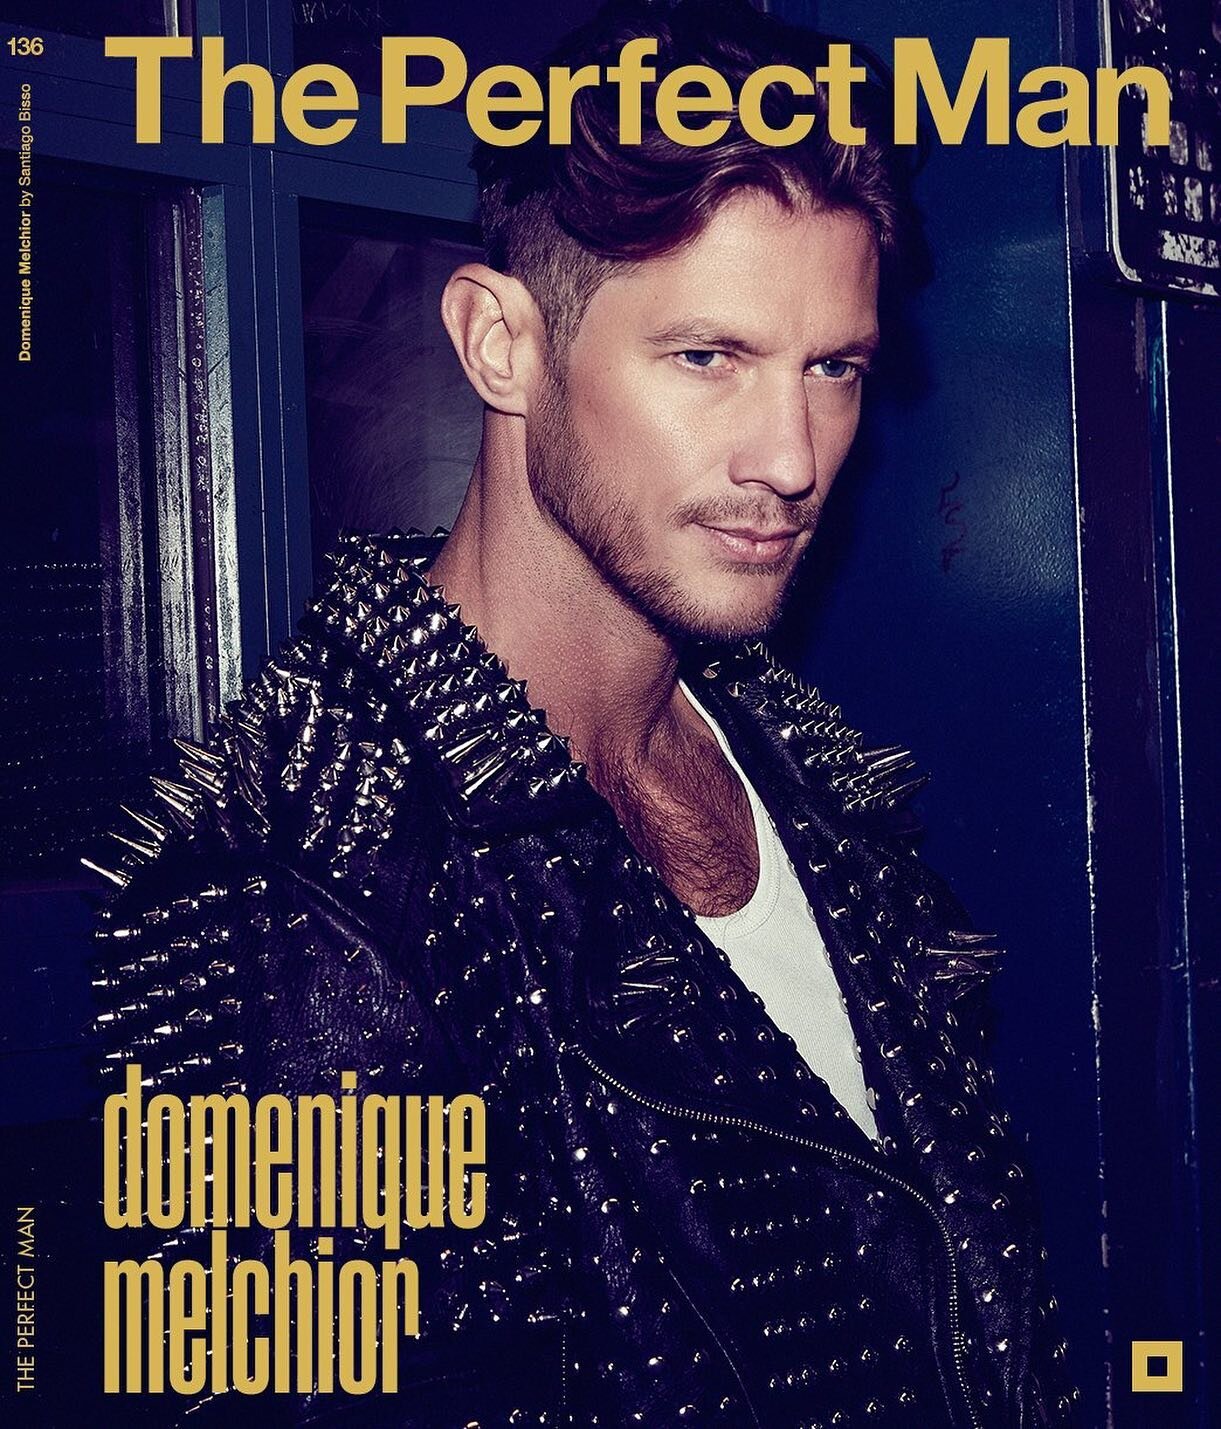 The Perfect Man&rsquo;s April/May Edition n&ordm;136 features a special interview with Armani Code model @domeniquemelchior lensed by @santiagobisso 

Link in bio to view the newly released The Perfect Man n&ordm;136